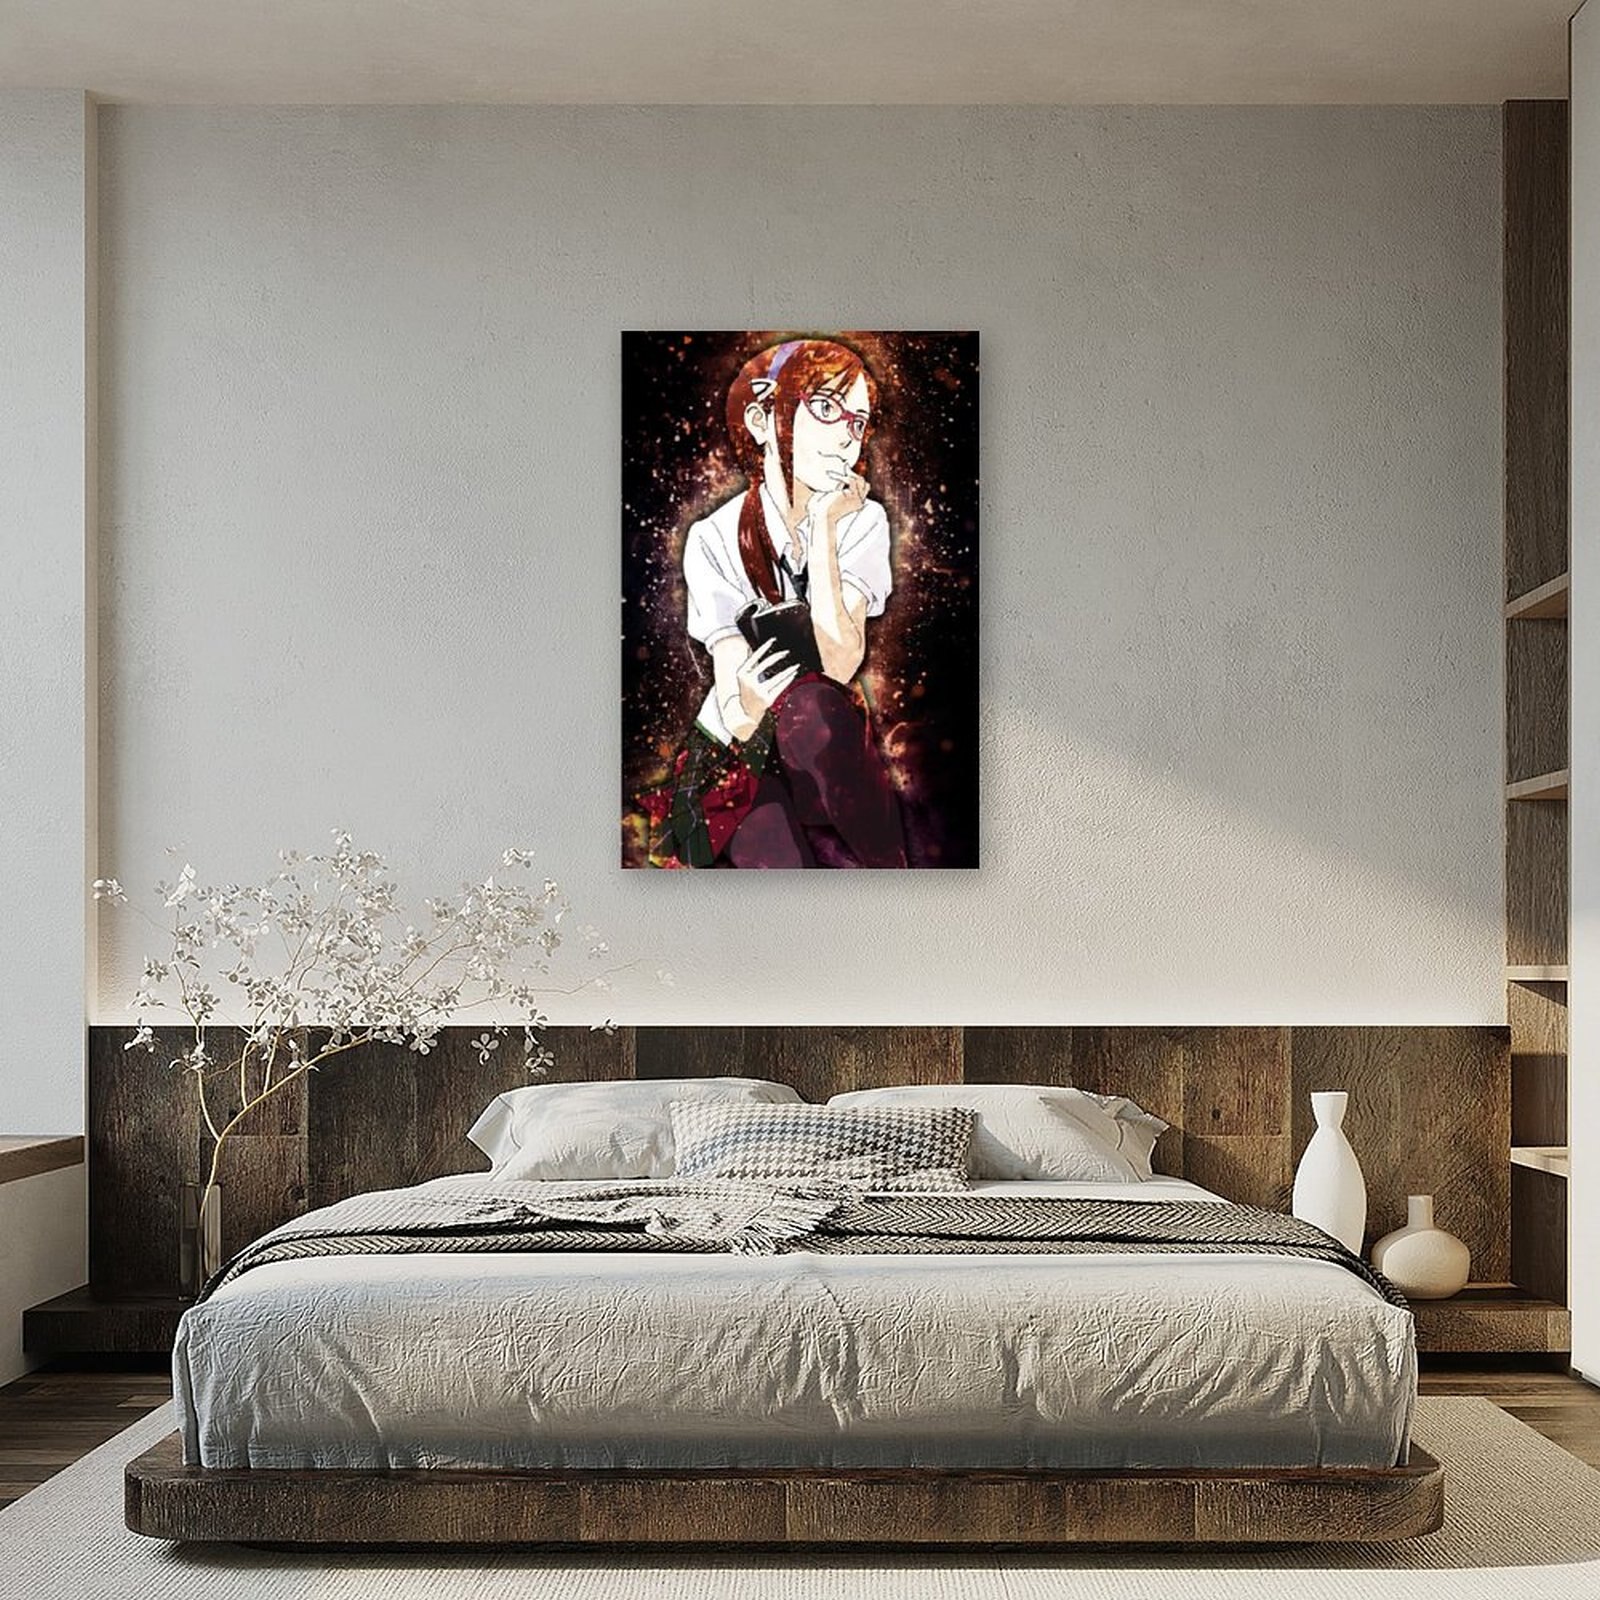 Anime Evangelion Makinami GirlCanvas Painting Wall Art Posters and Prints Wall Pictures for Living Room Decoration 5 - Evangelion Shop